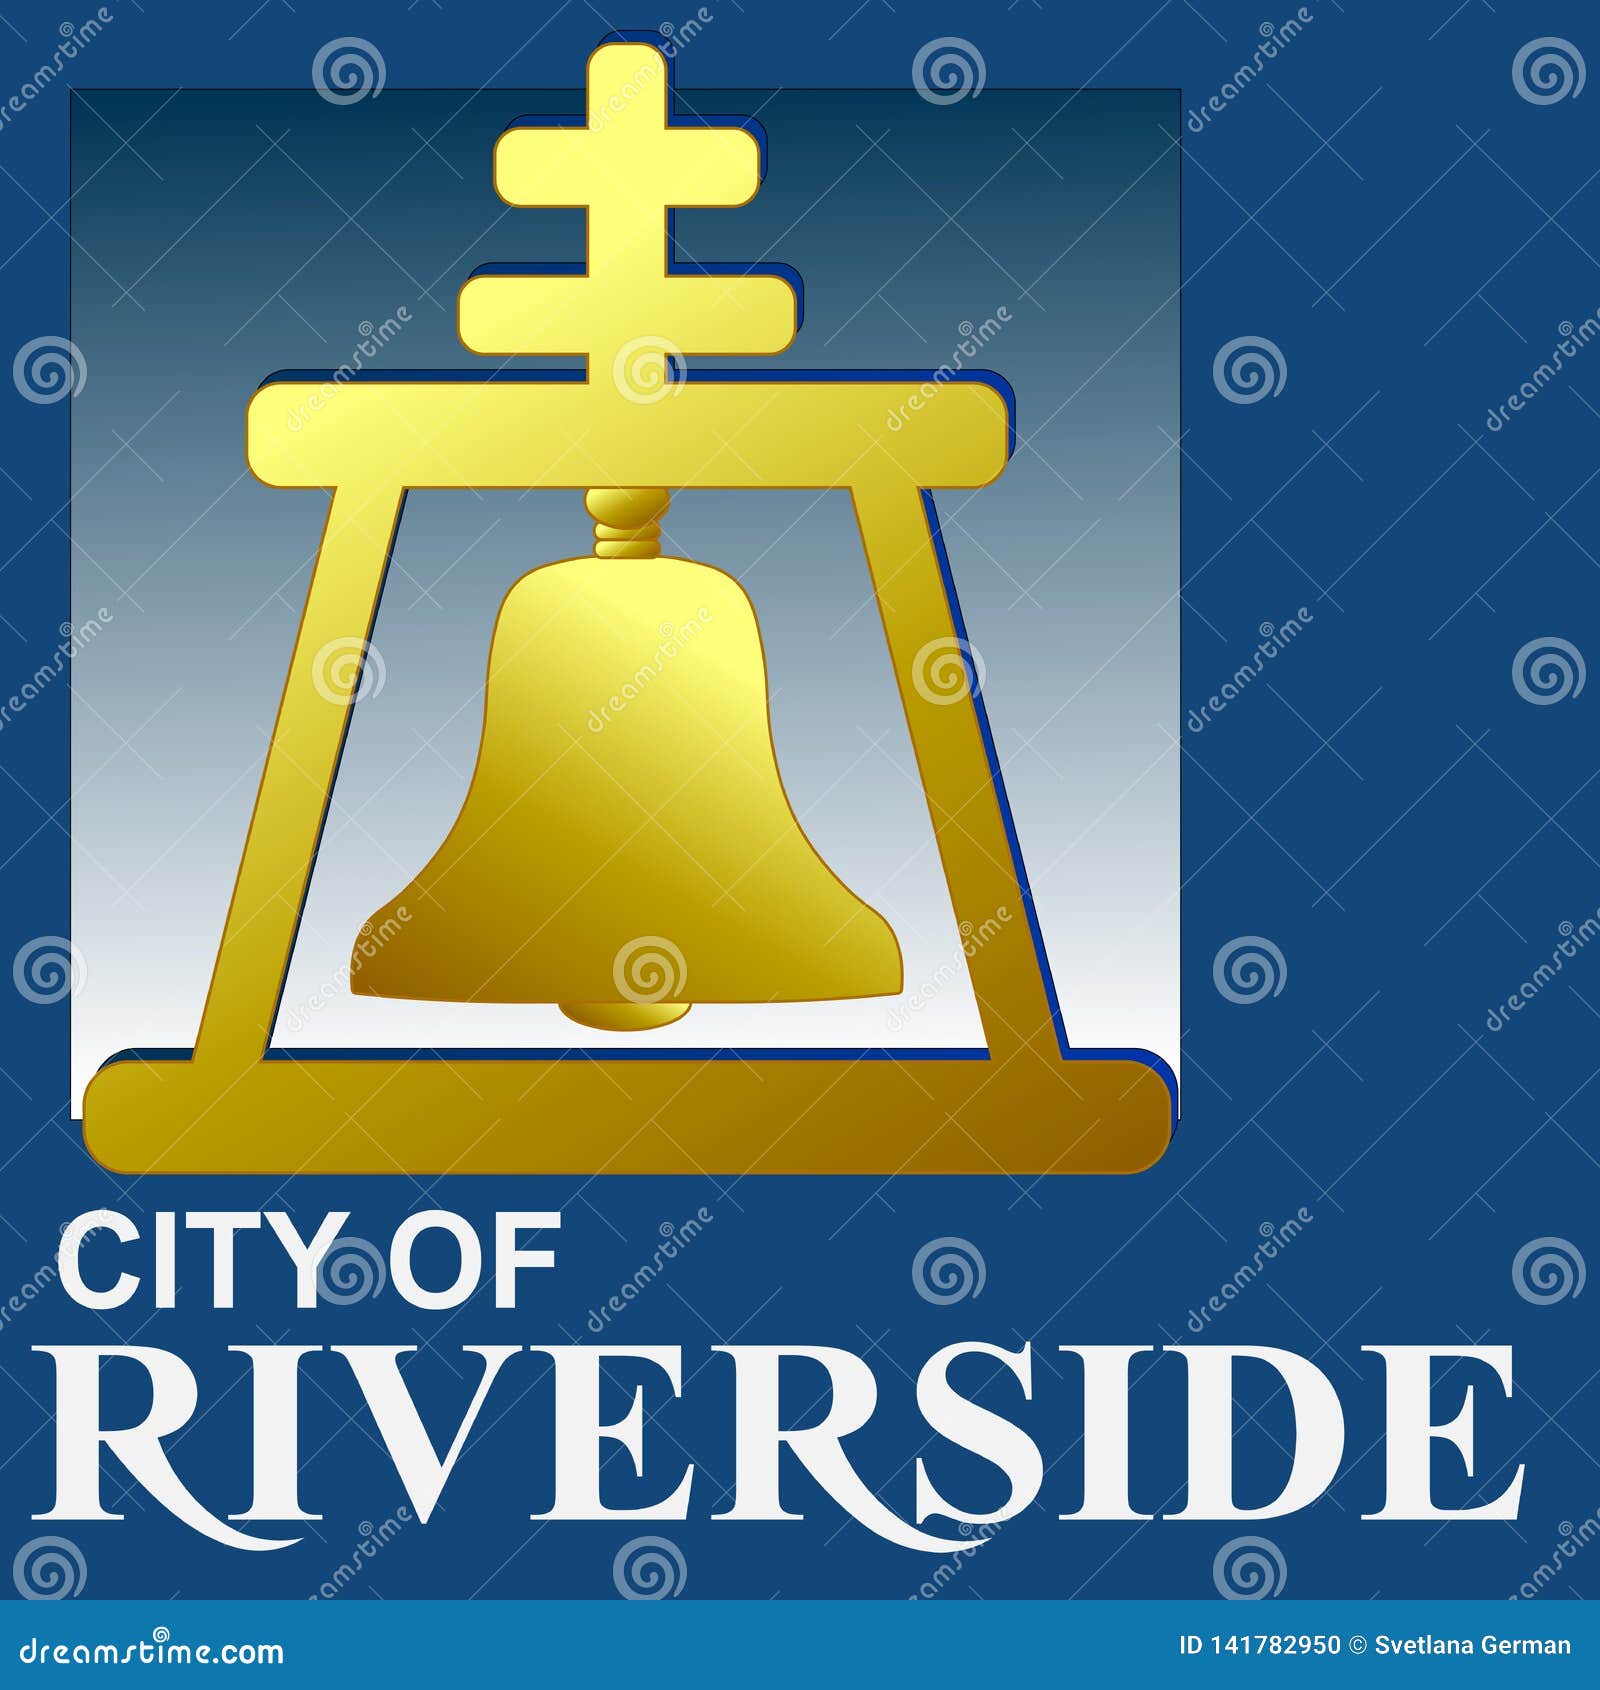 coat of arms of riverside in california, united states